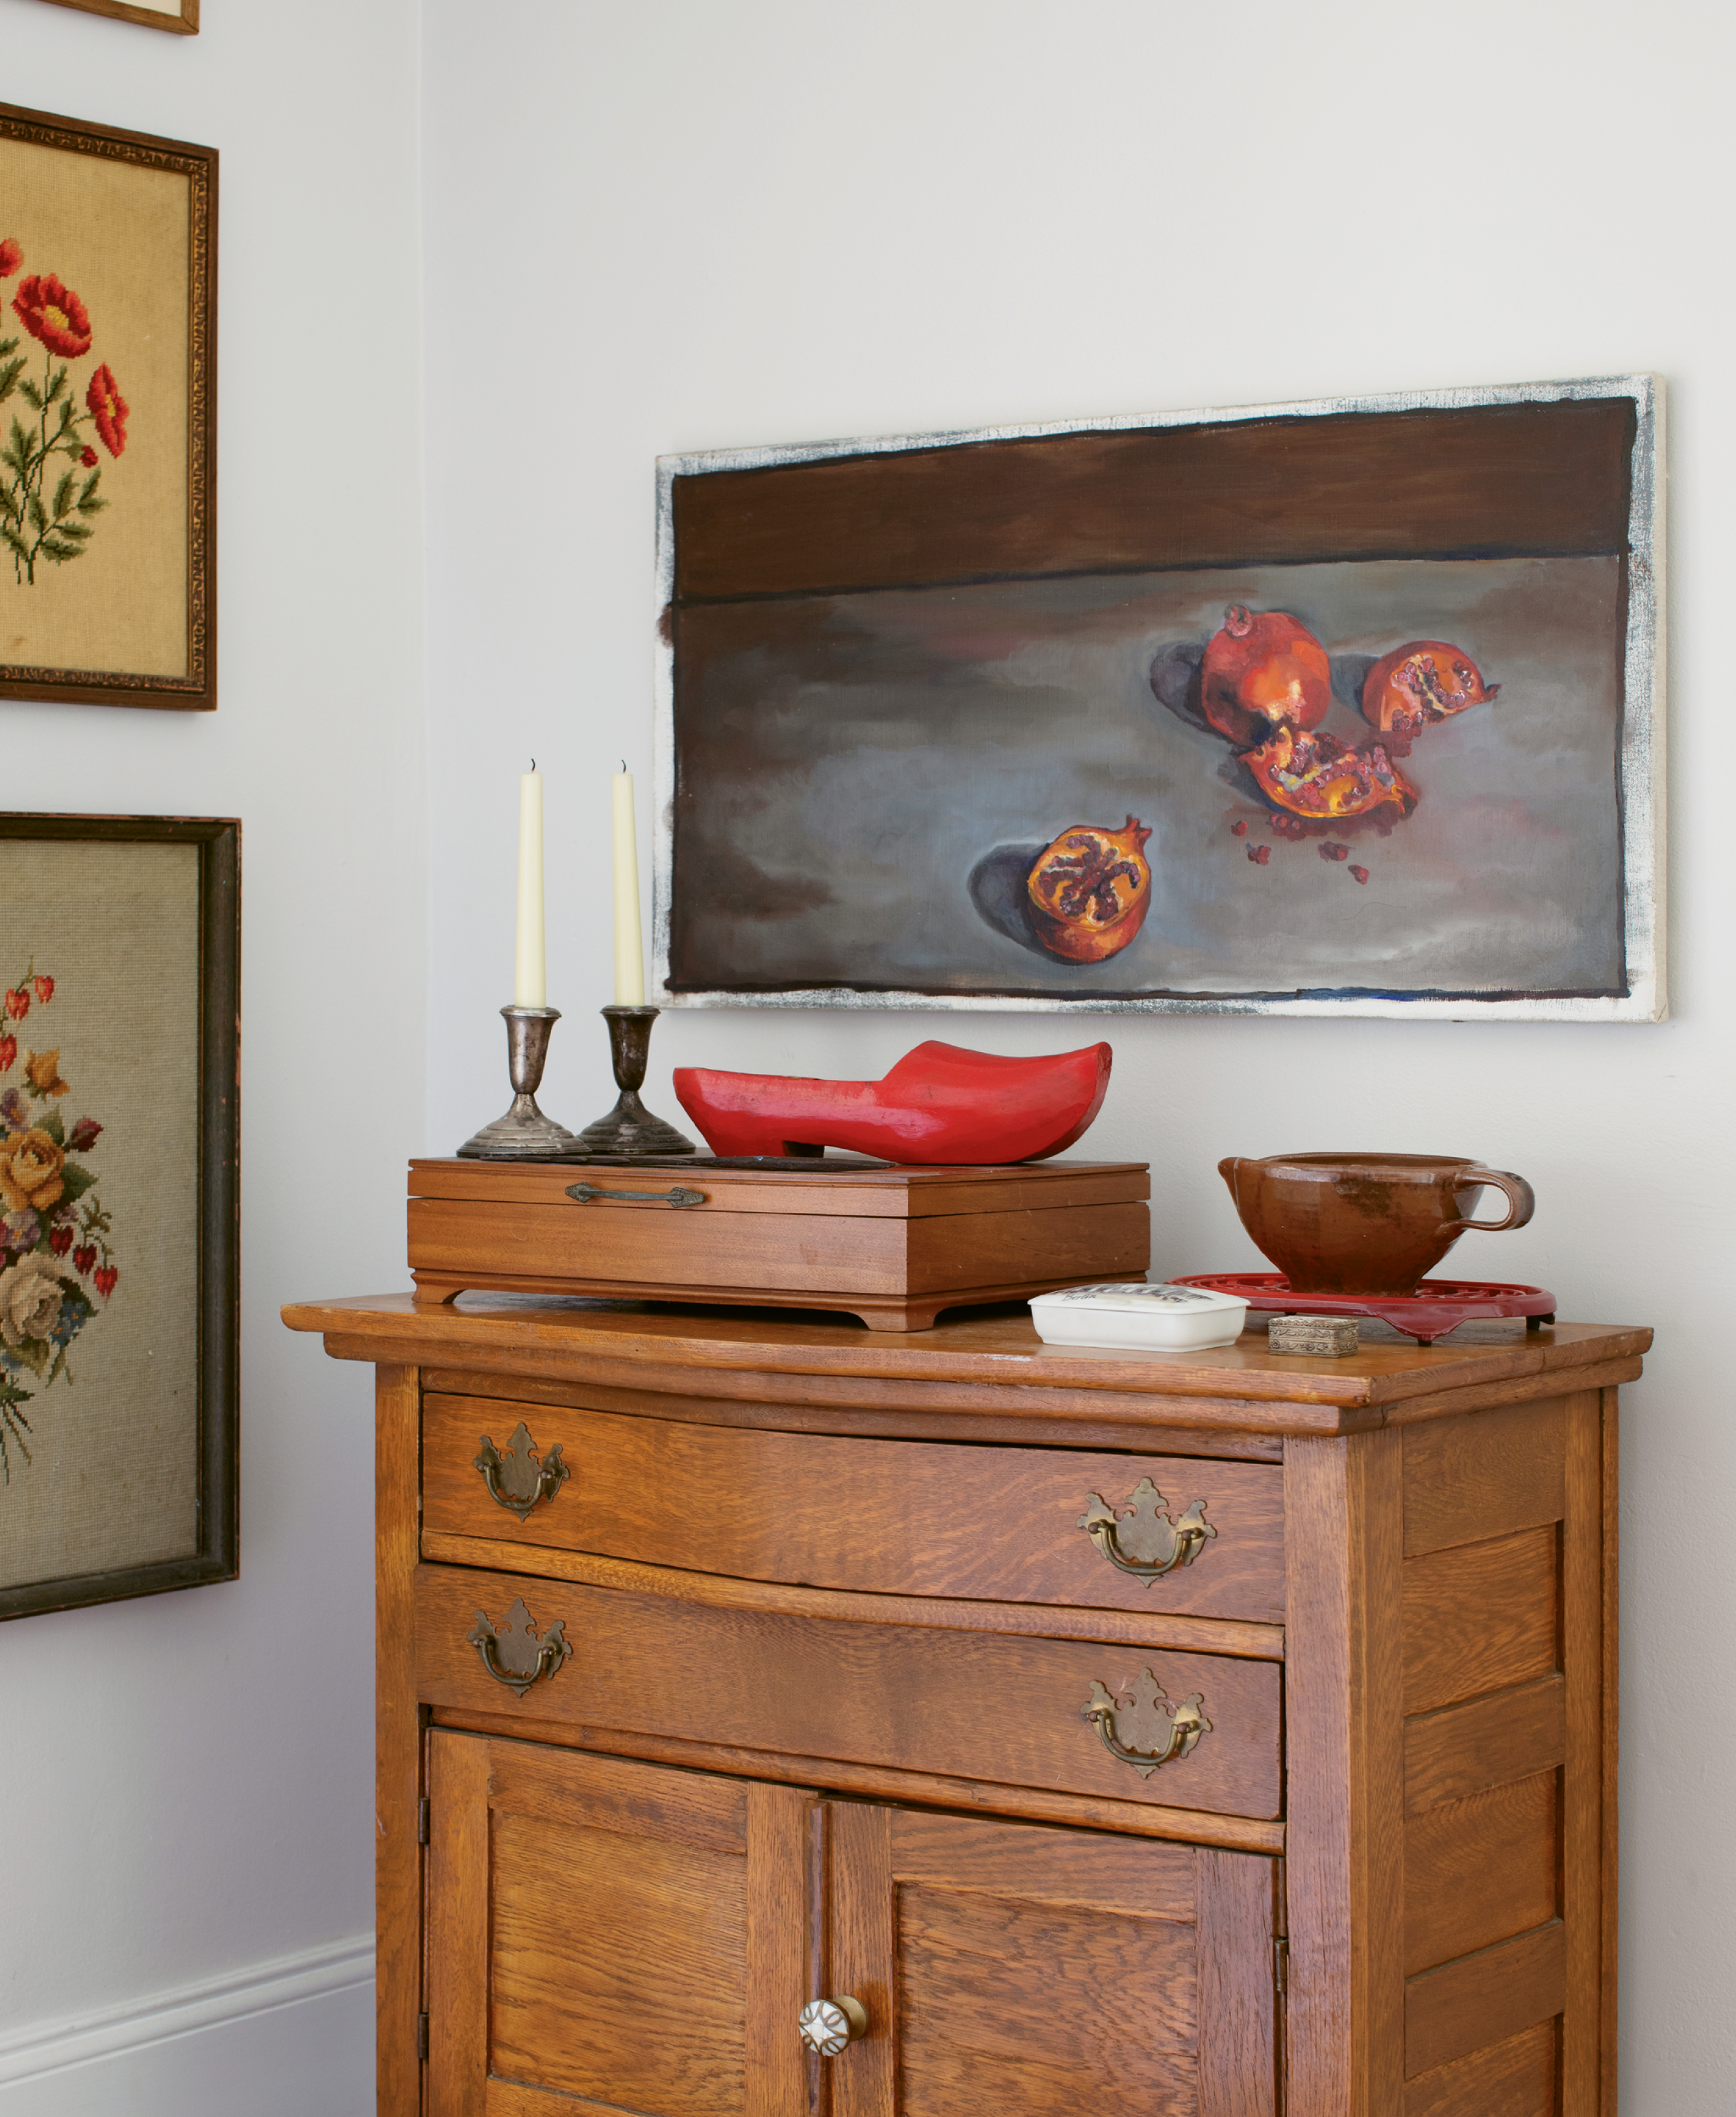 Jacques and Carrie Larson’s West Ashley home looks contemporary from the curb, but it’s filled with meaningful pieces from the past and present, like this pomegranate still-life by Carrie, needlepoints by Jacques’s grandmother, and a red clog carved by his great-grandfather.